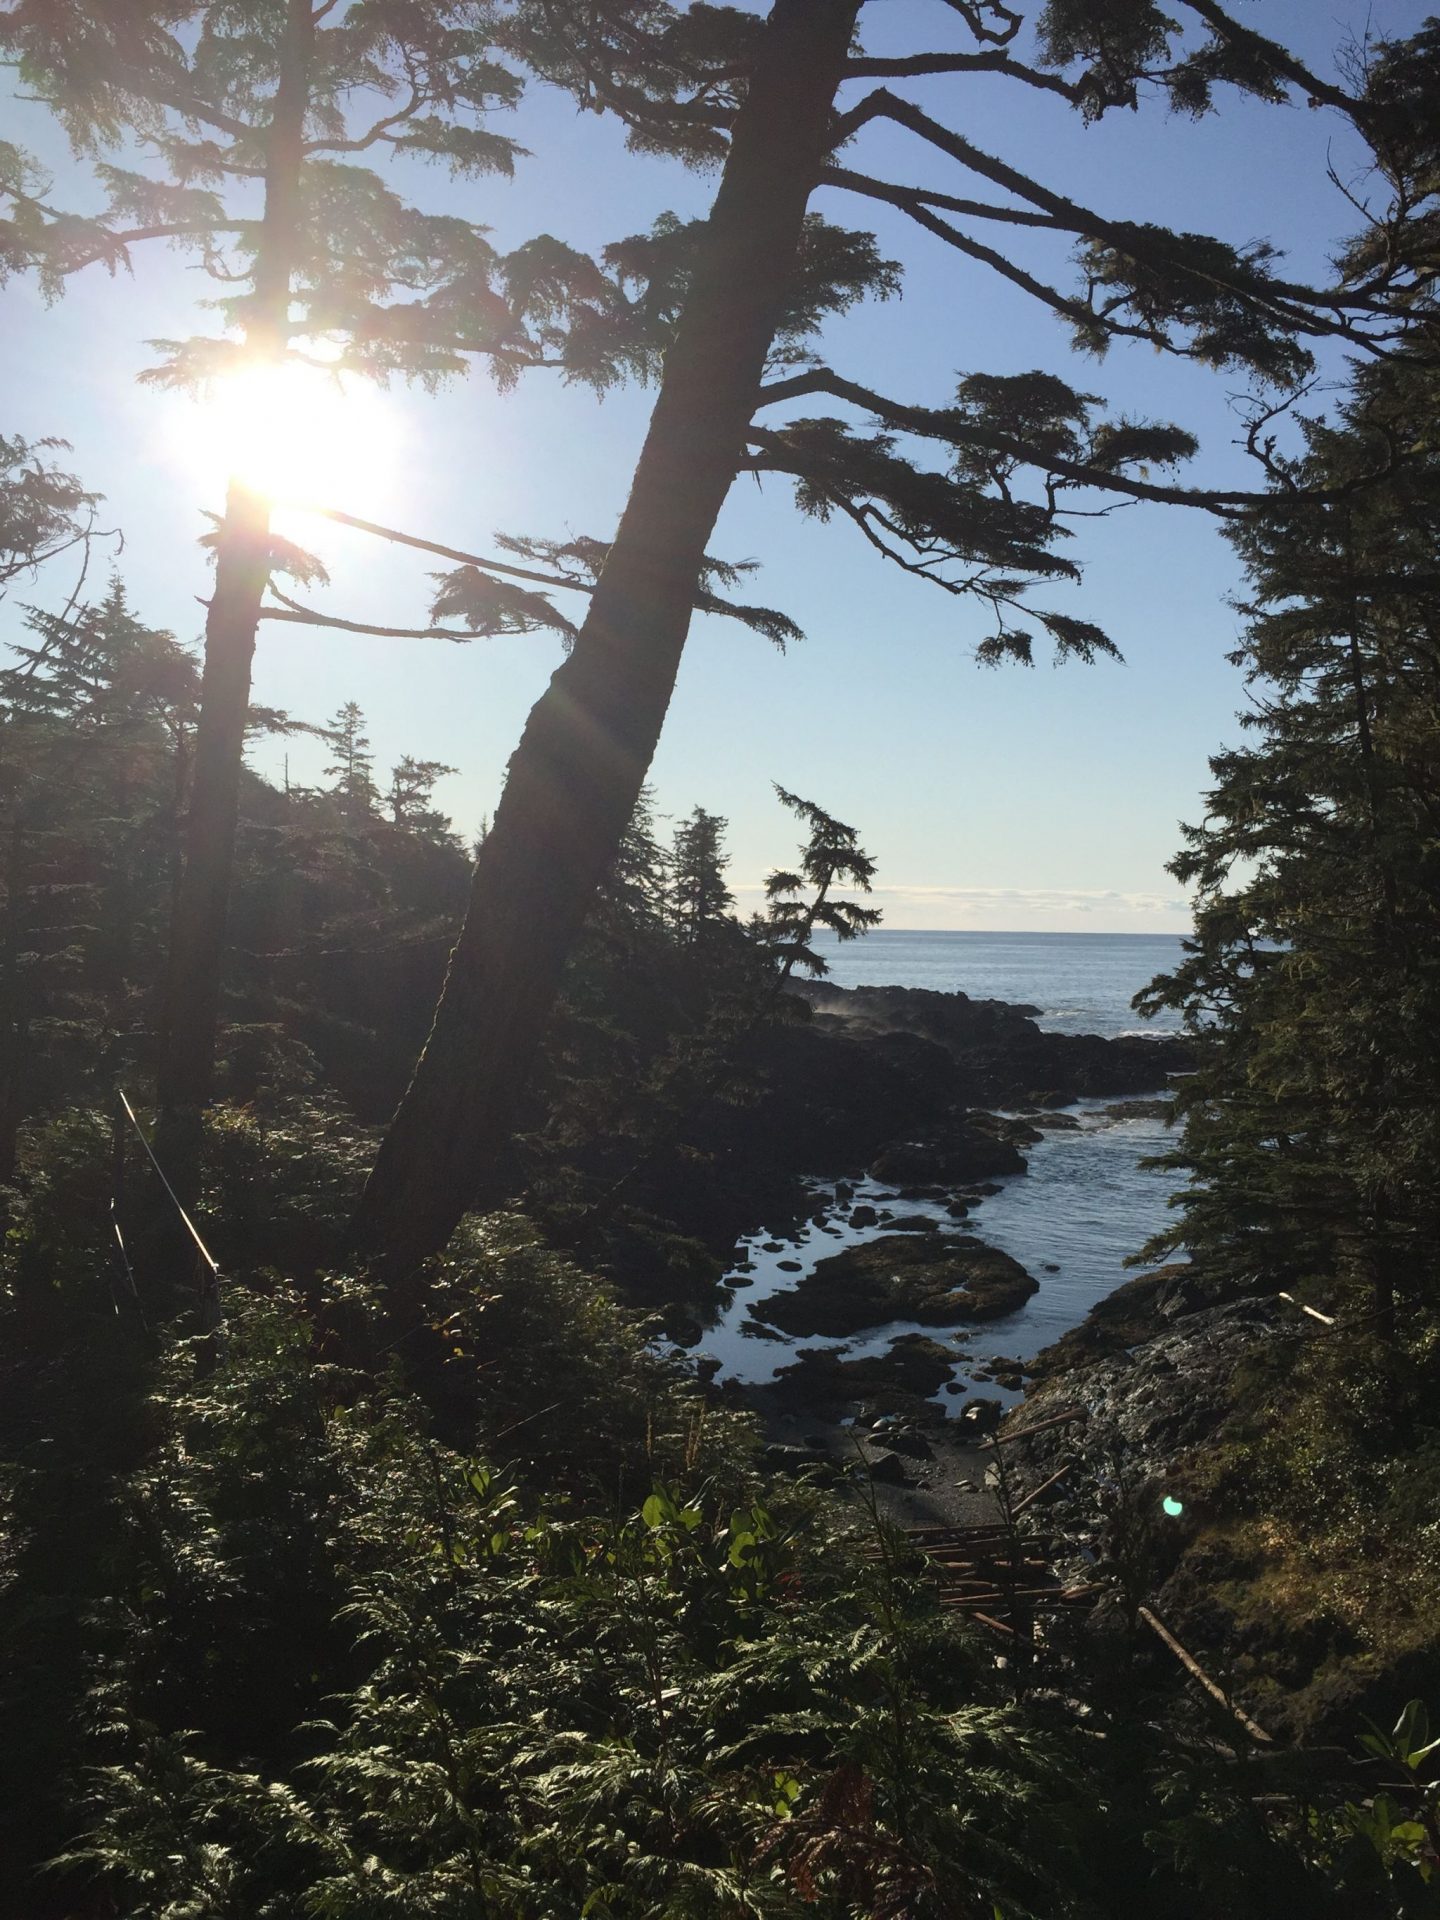 Wild Pacific Trail, Ucluelet on Vancouver Island